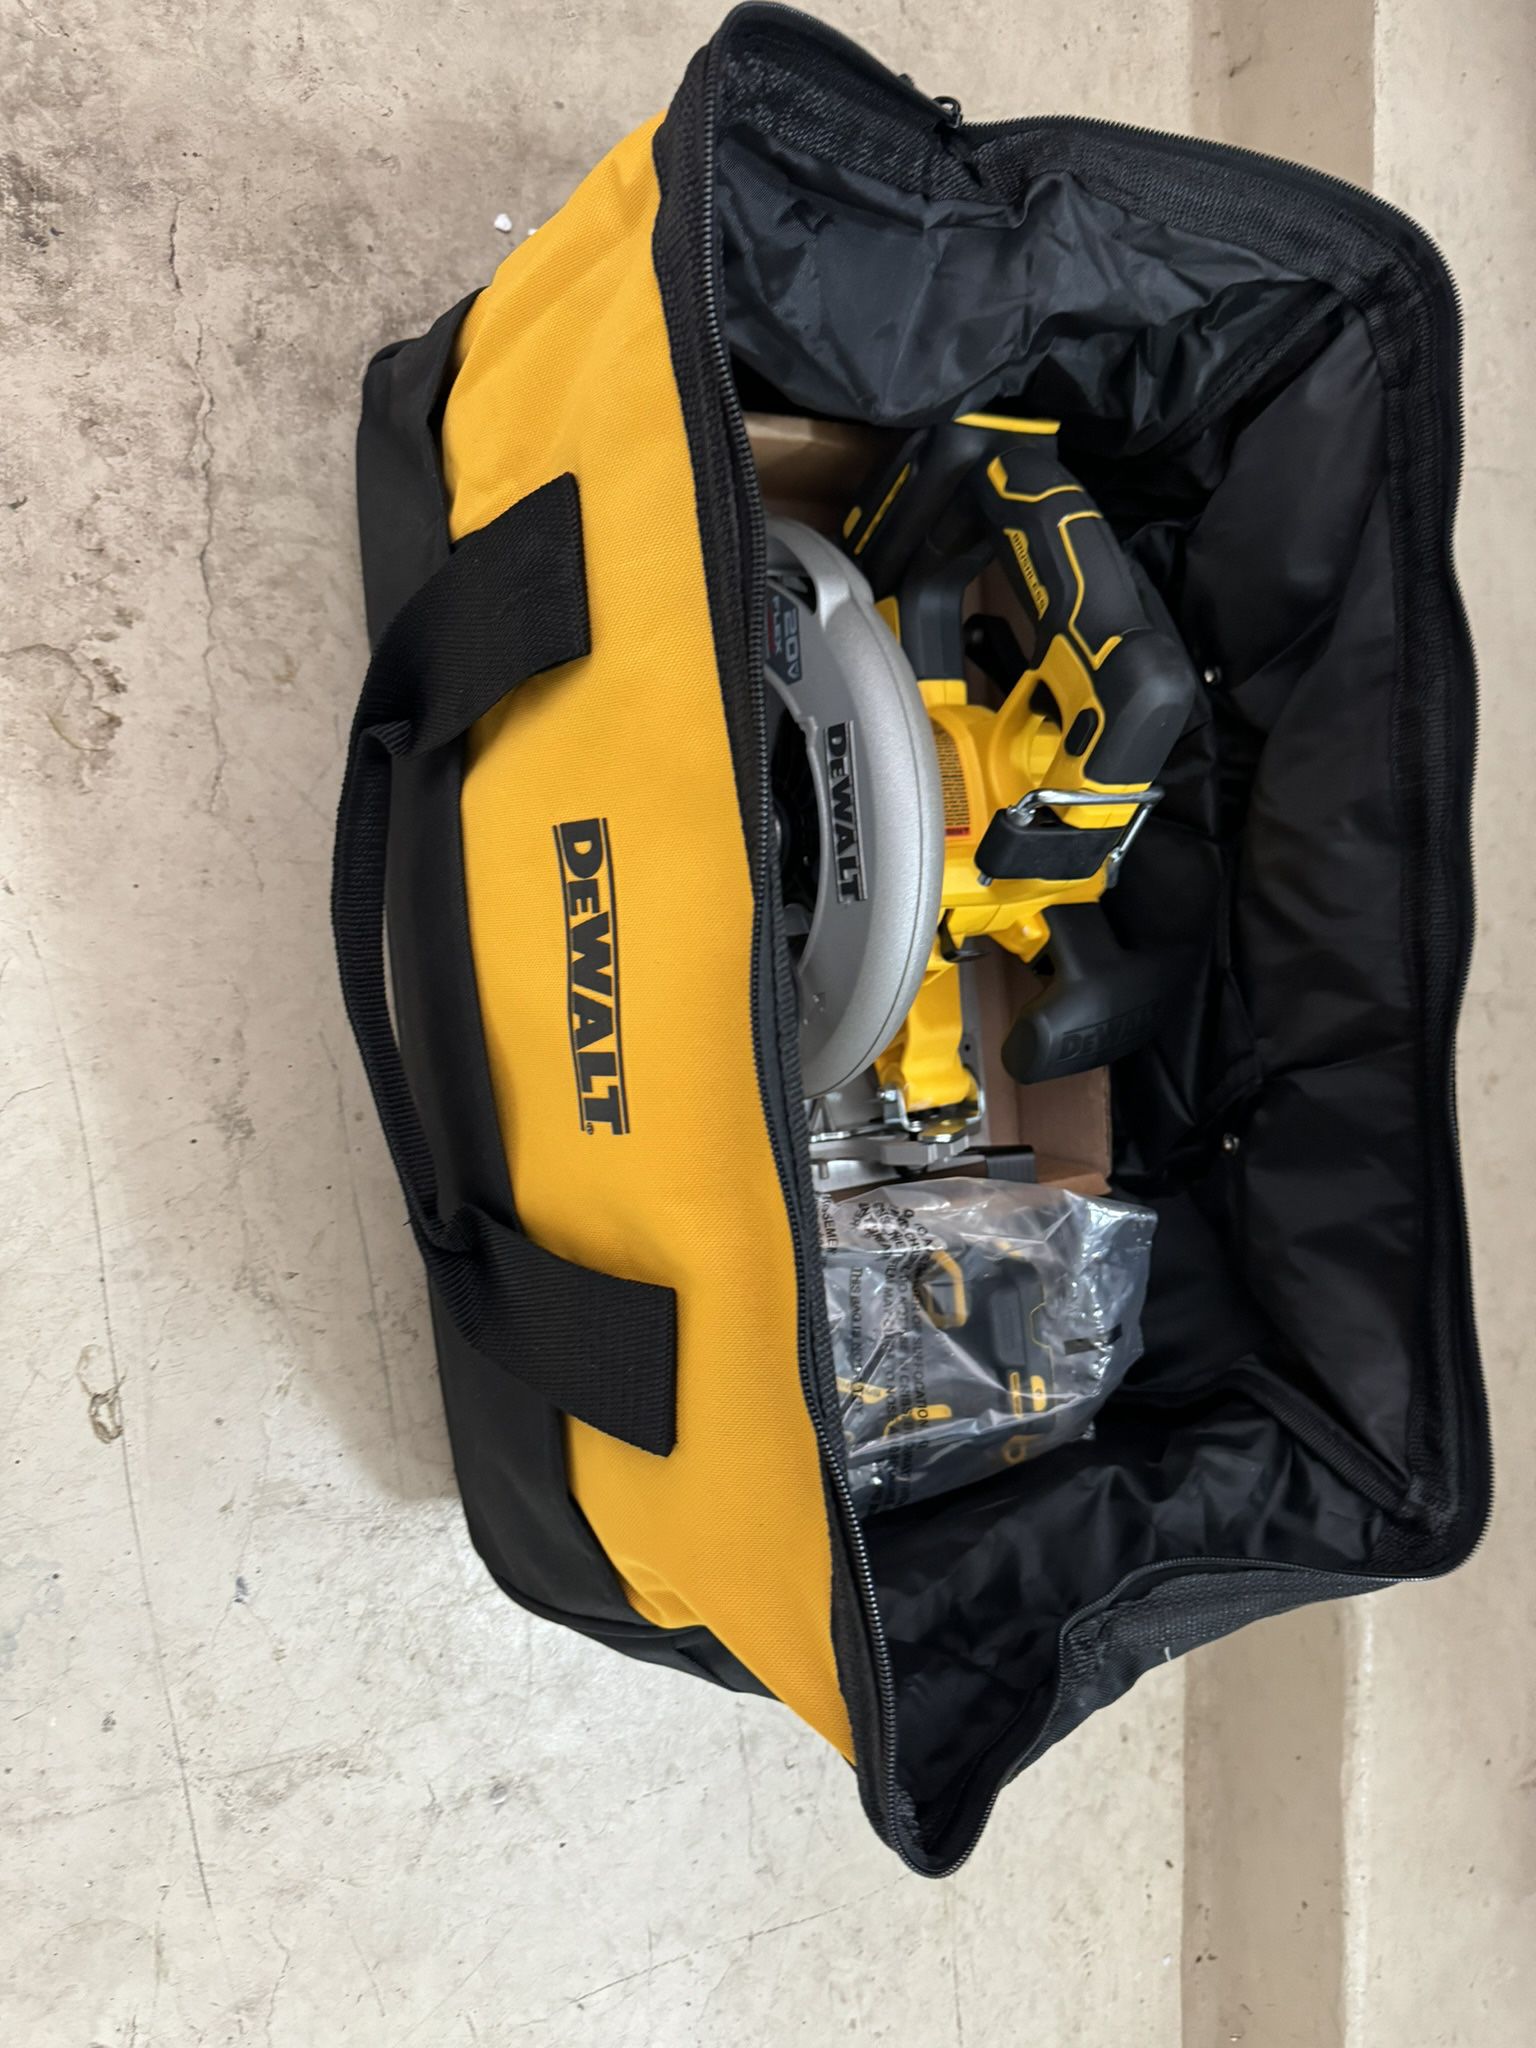 New. DeWalt DCS 573 Saw And 1/2 In Hammer Drill